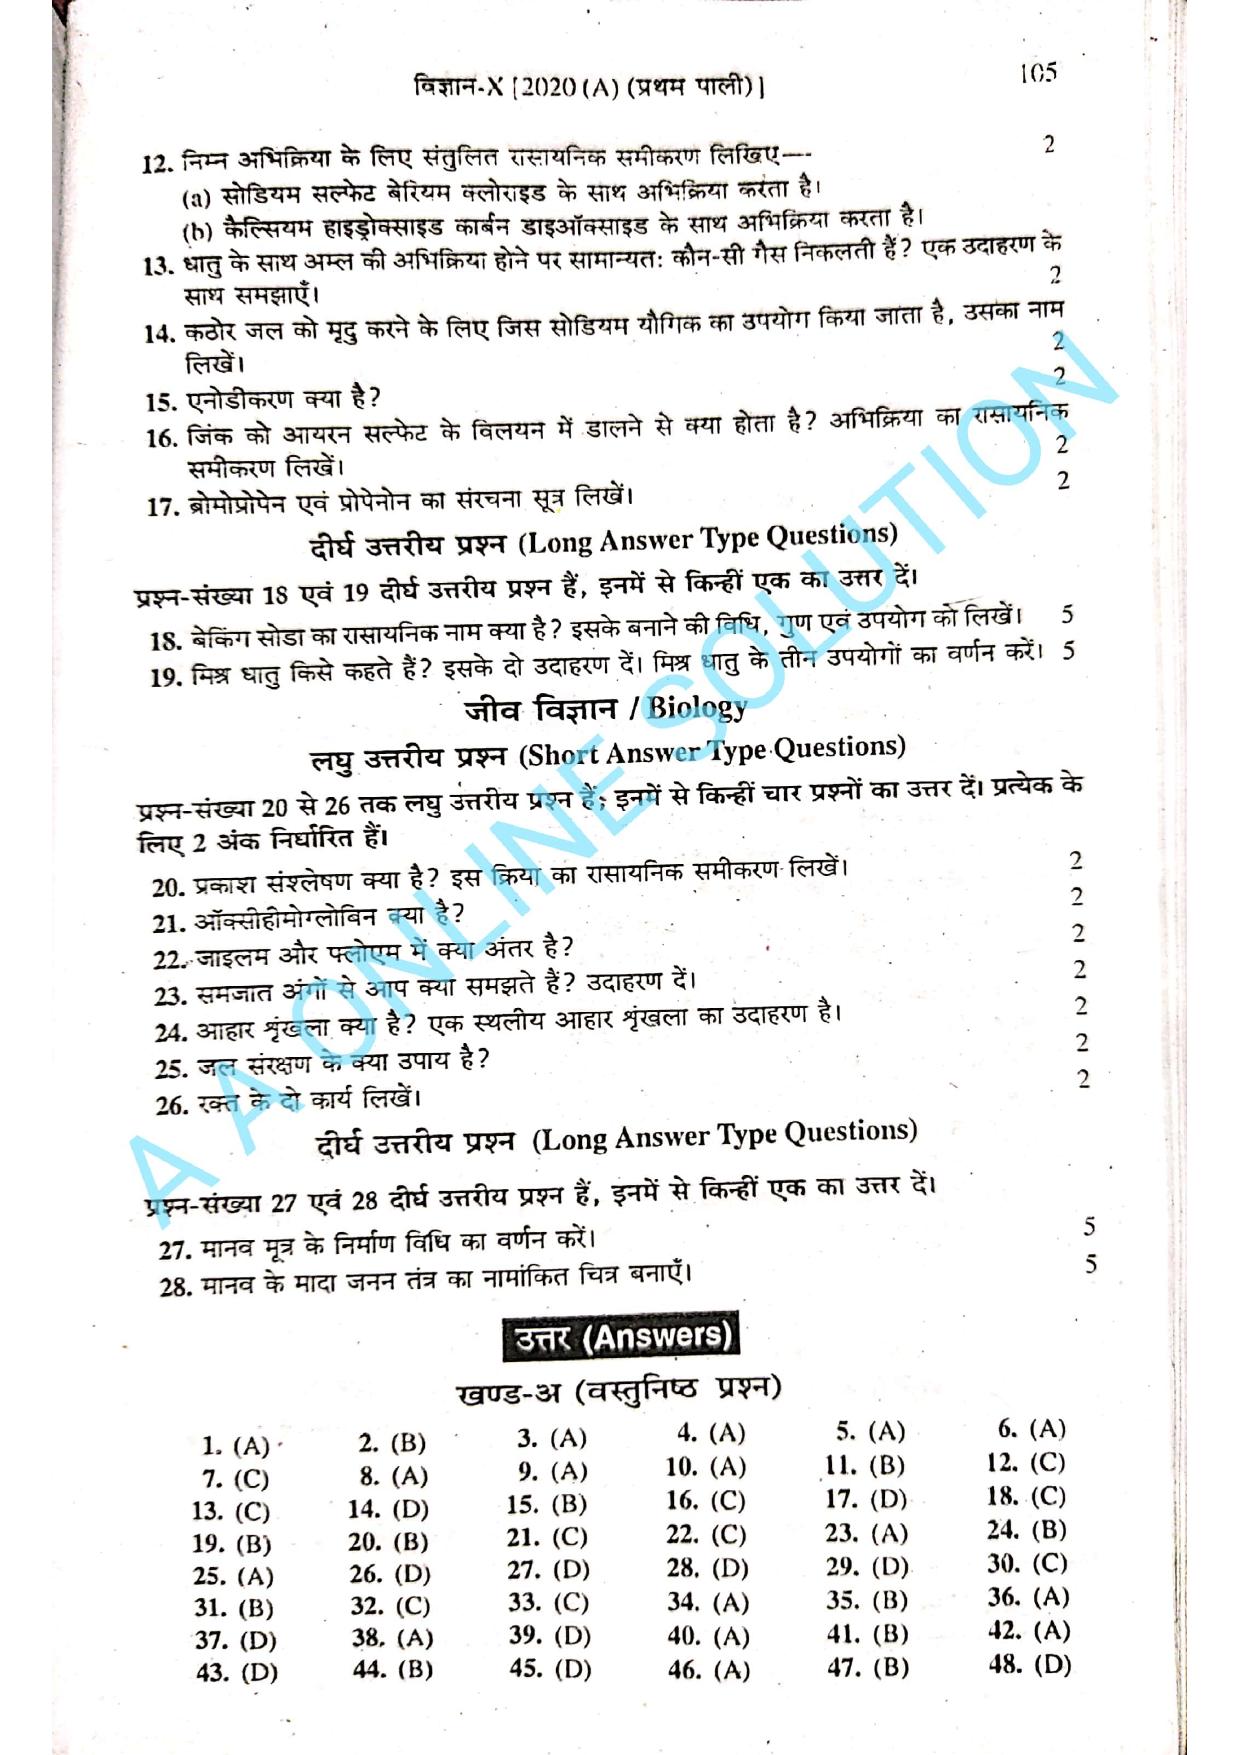 Bihar Board Class 10 Science 2020 (1st Sitting) Question Paper - Page 5